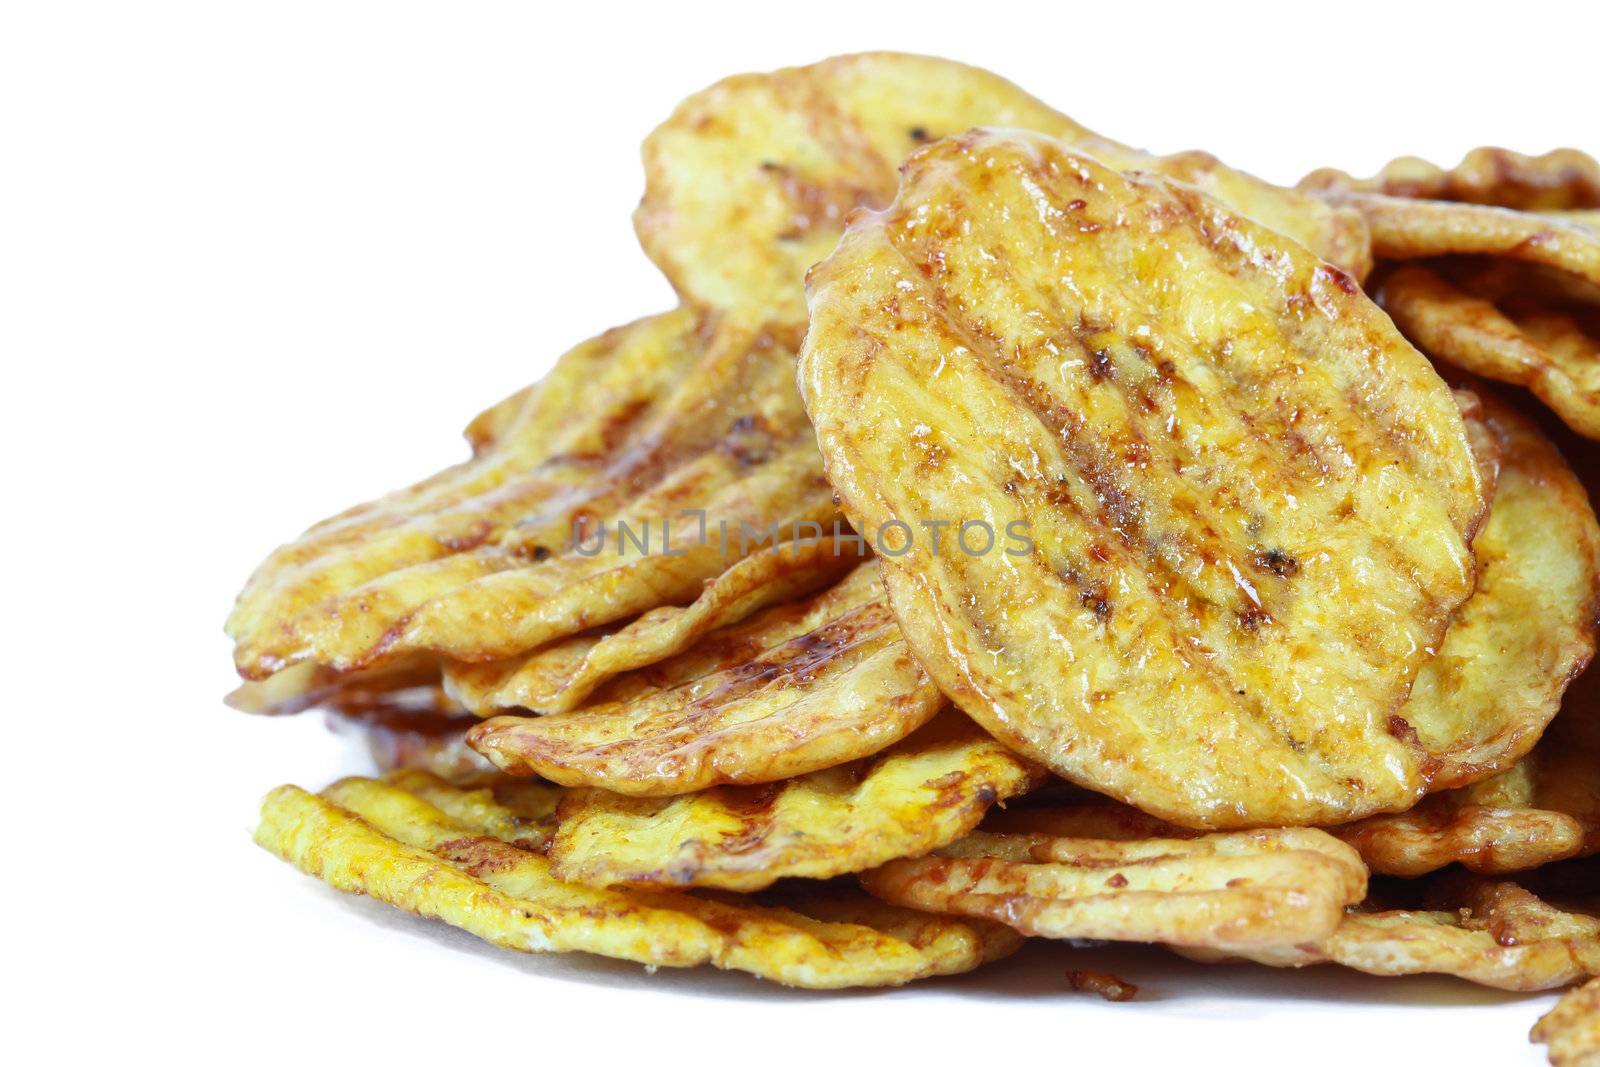 Fried thinly sliced banana chips, a tropical snack by bajita111122